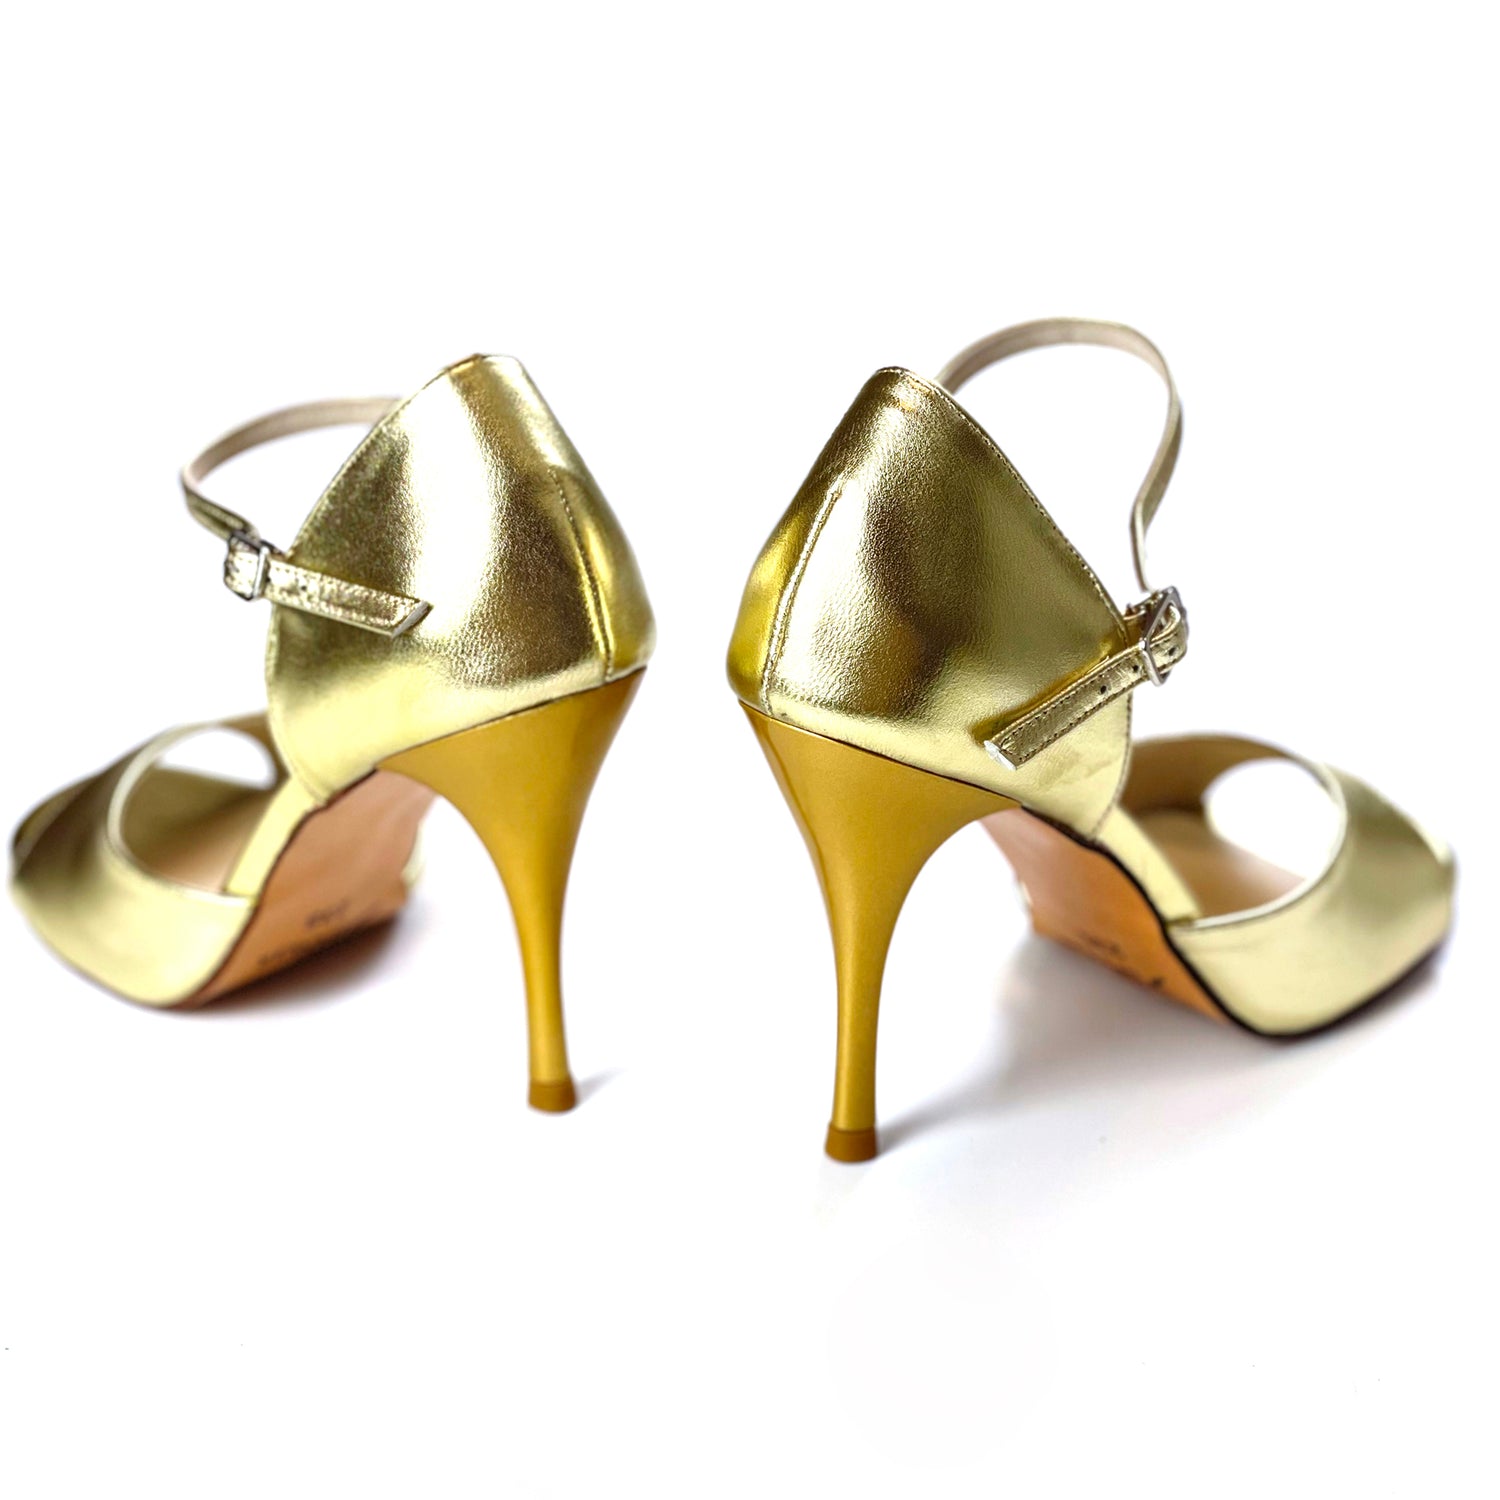 Pro Dancer gold leather high heels for Argentine Tango6